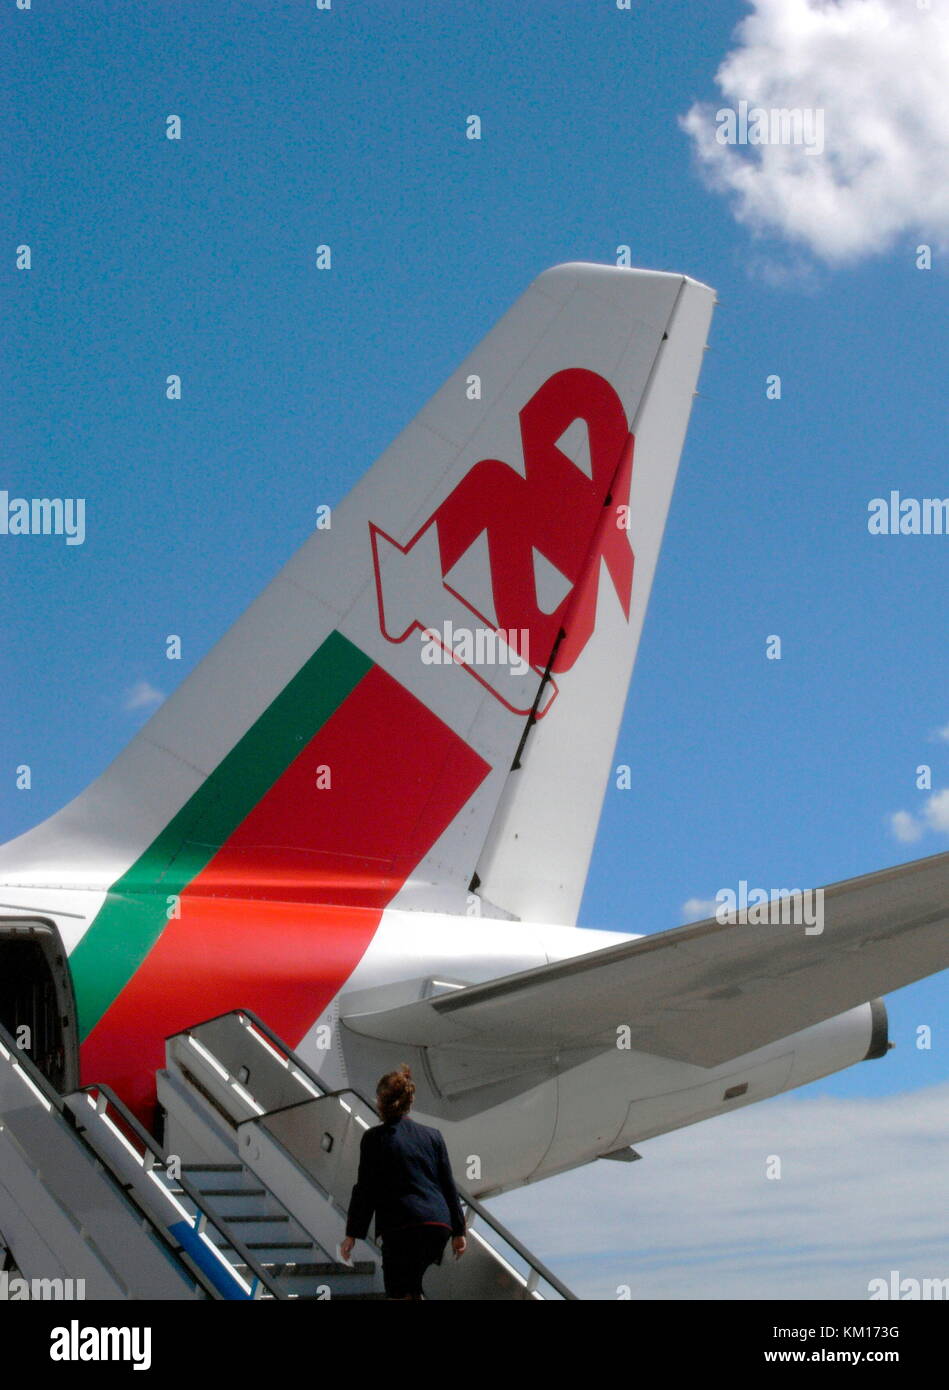 AJAXNETPHOTO. 2007. LISBON, PORTUGAL. - Portugal's national flag carrier TAP airline colours on airliner fin. PHOTO:JONATHAN EASTLAND/AJAX REF:11059 Stock Photo